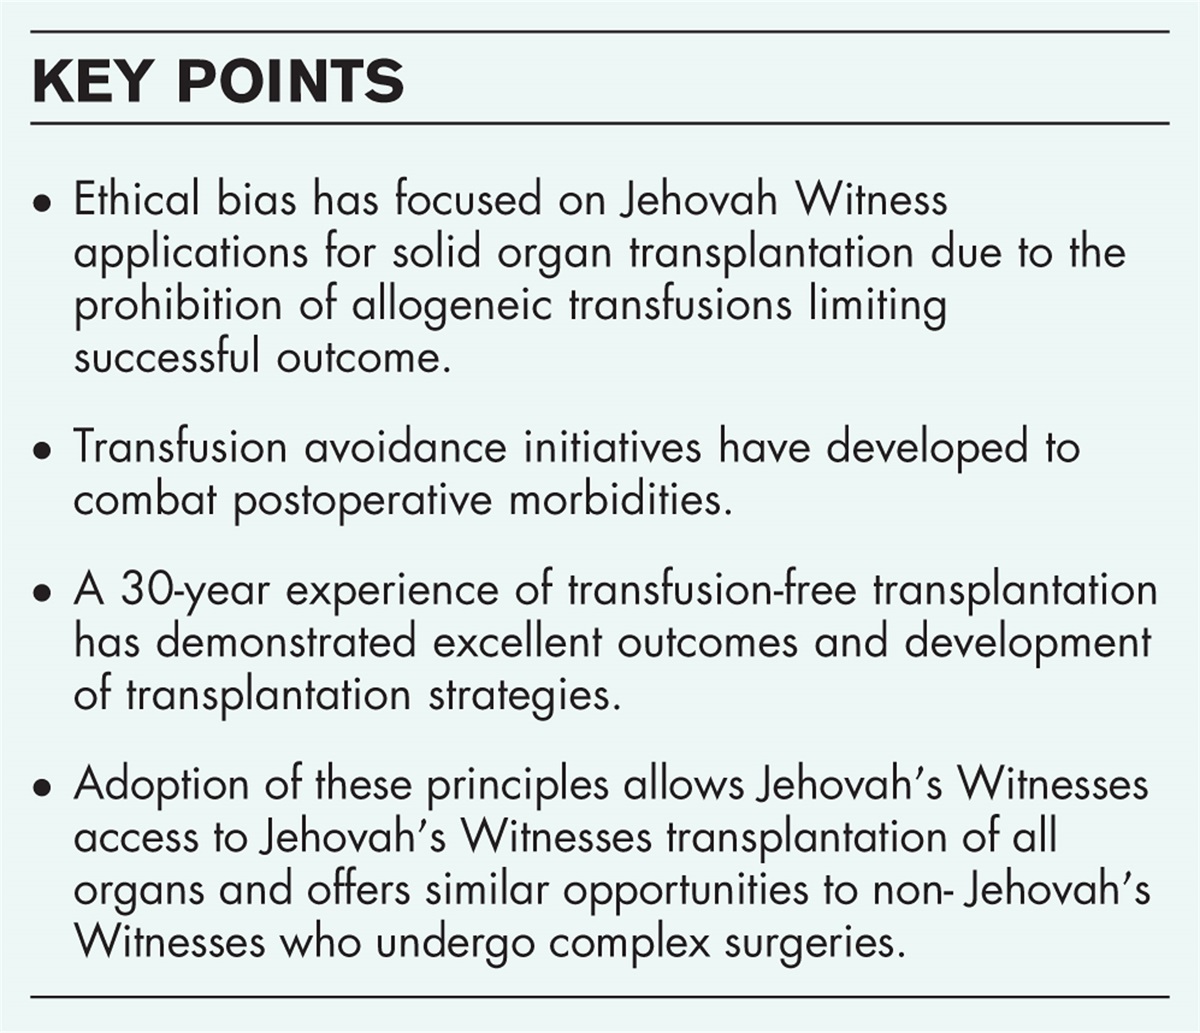 Ethical issues in solid organ transplantation: transfusion-free transplantation in Jehovah's witness patients